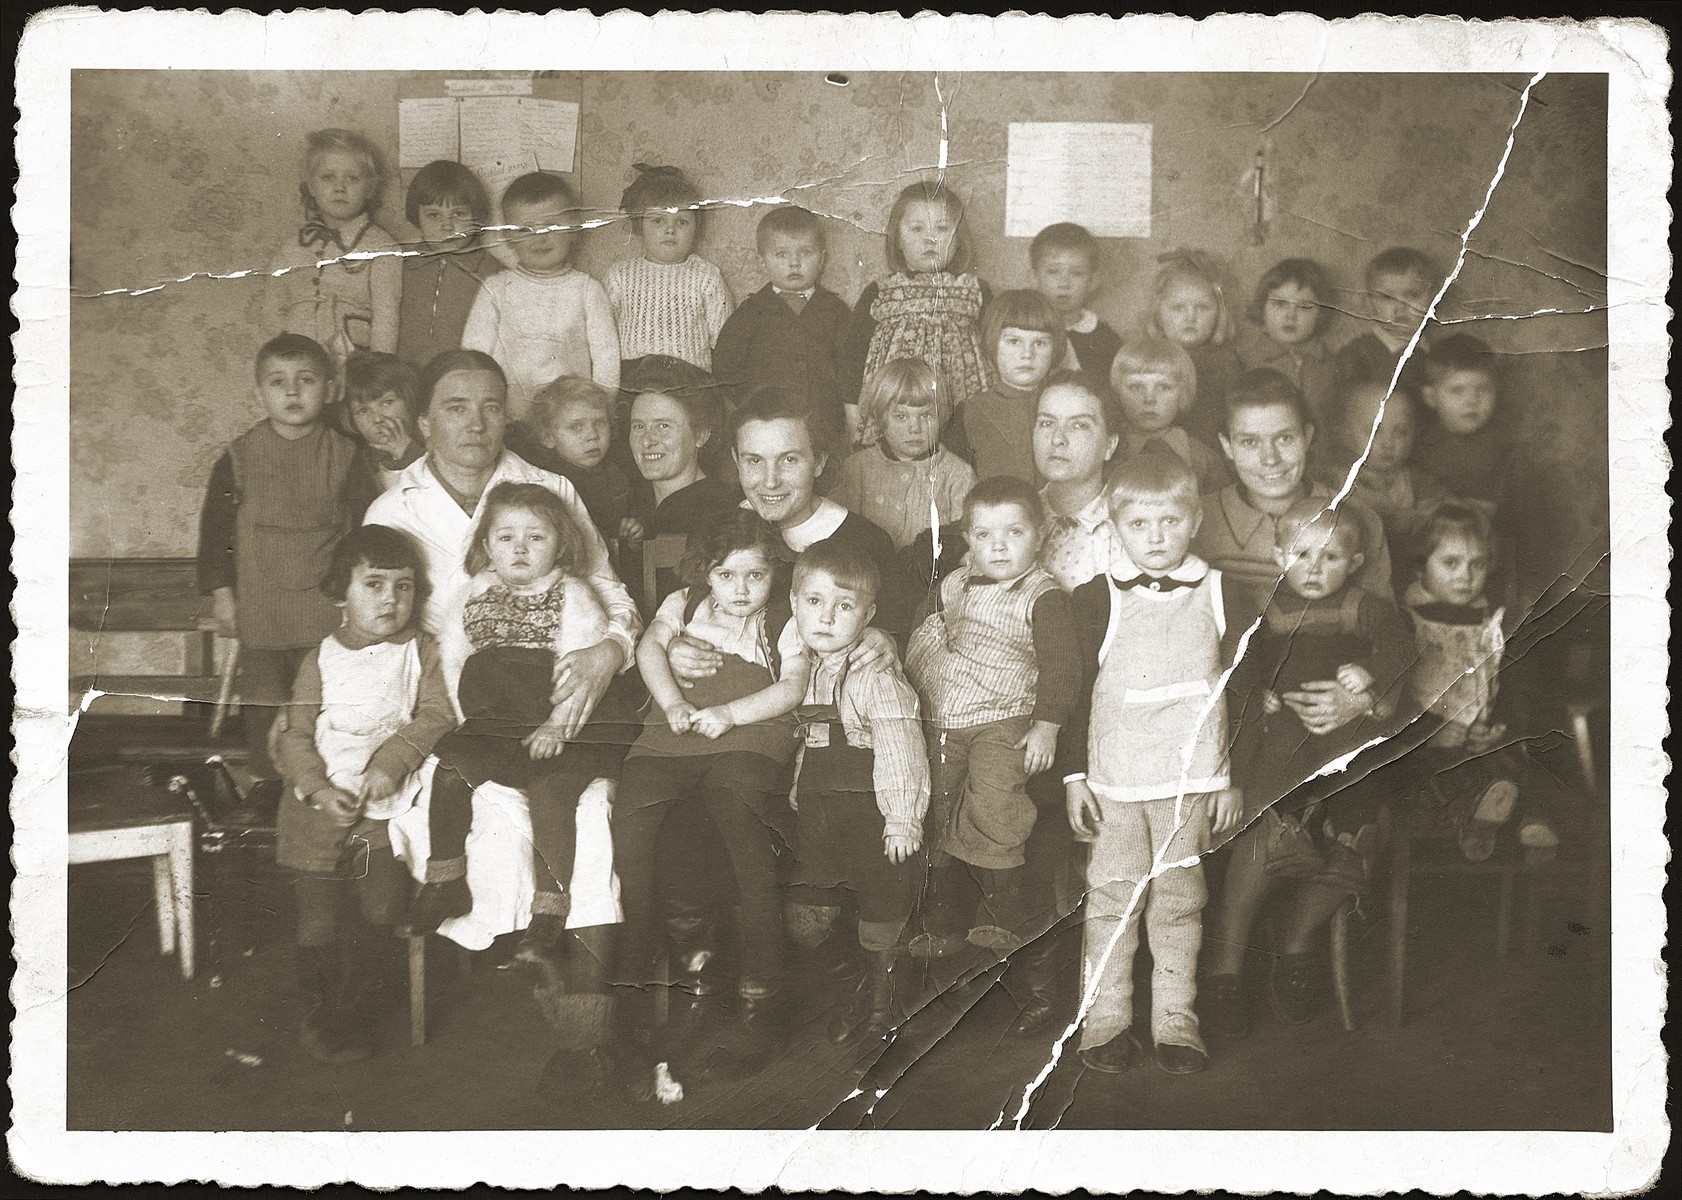 Group portrait of teachers and pupils of a Polish kindergarten in Bialystok.  

Among those pictured is Anna Strzelczyk (front row, third from the left).